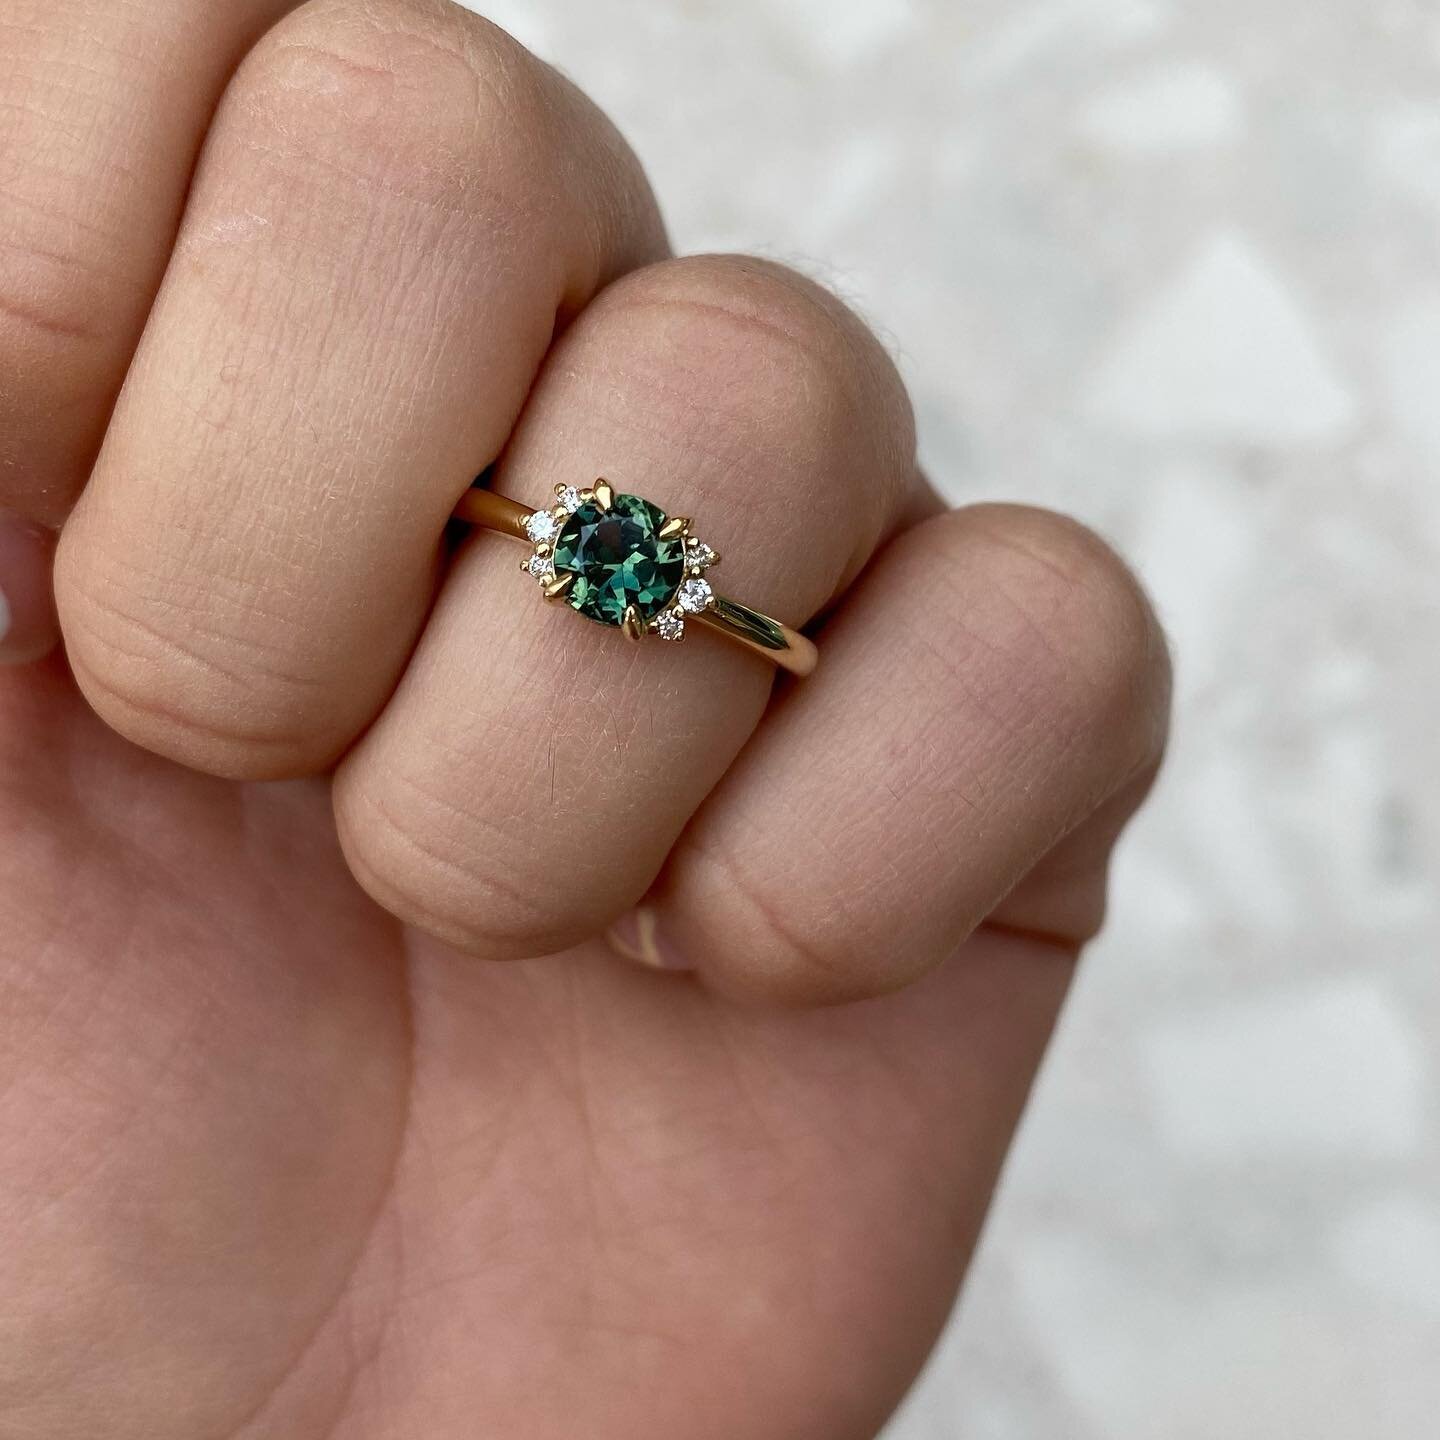 This green sapphire ring made its way to its new home today 🤍⁣
⁣
When I first spoke to R she wanted an eternity ring to celebrate the birth of her little boy, however things soon evolved and we ended up with this beauty, set in 18ct yellow gold with